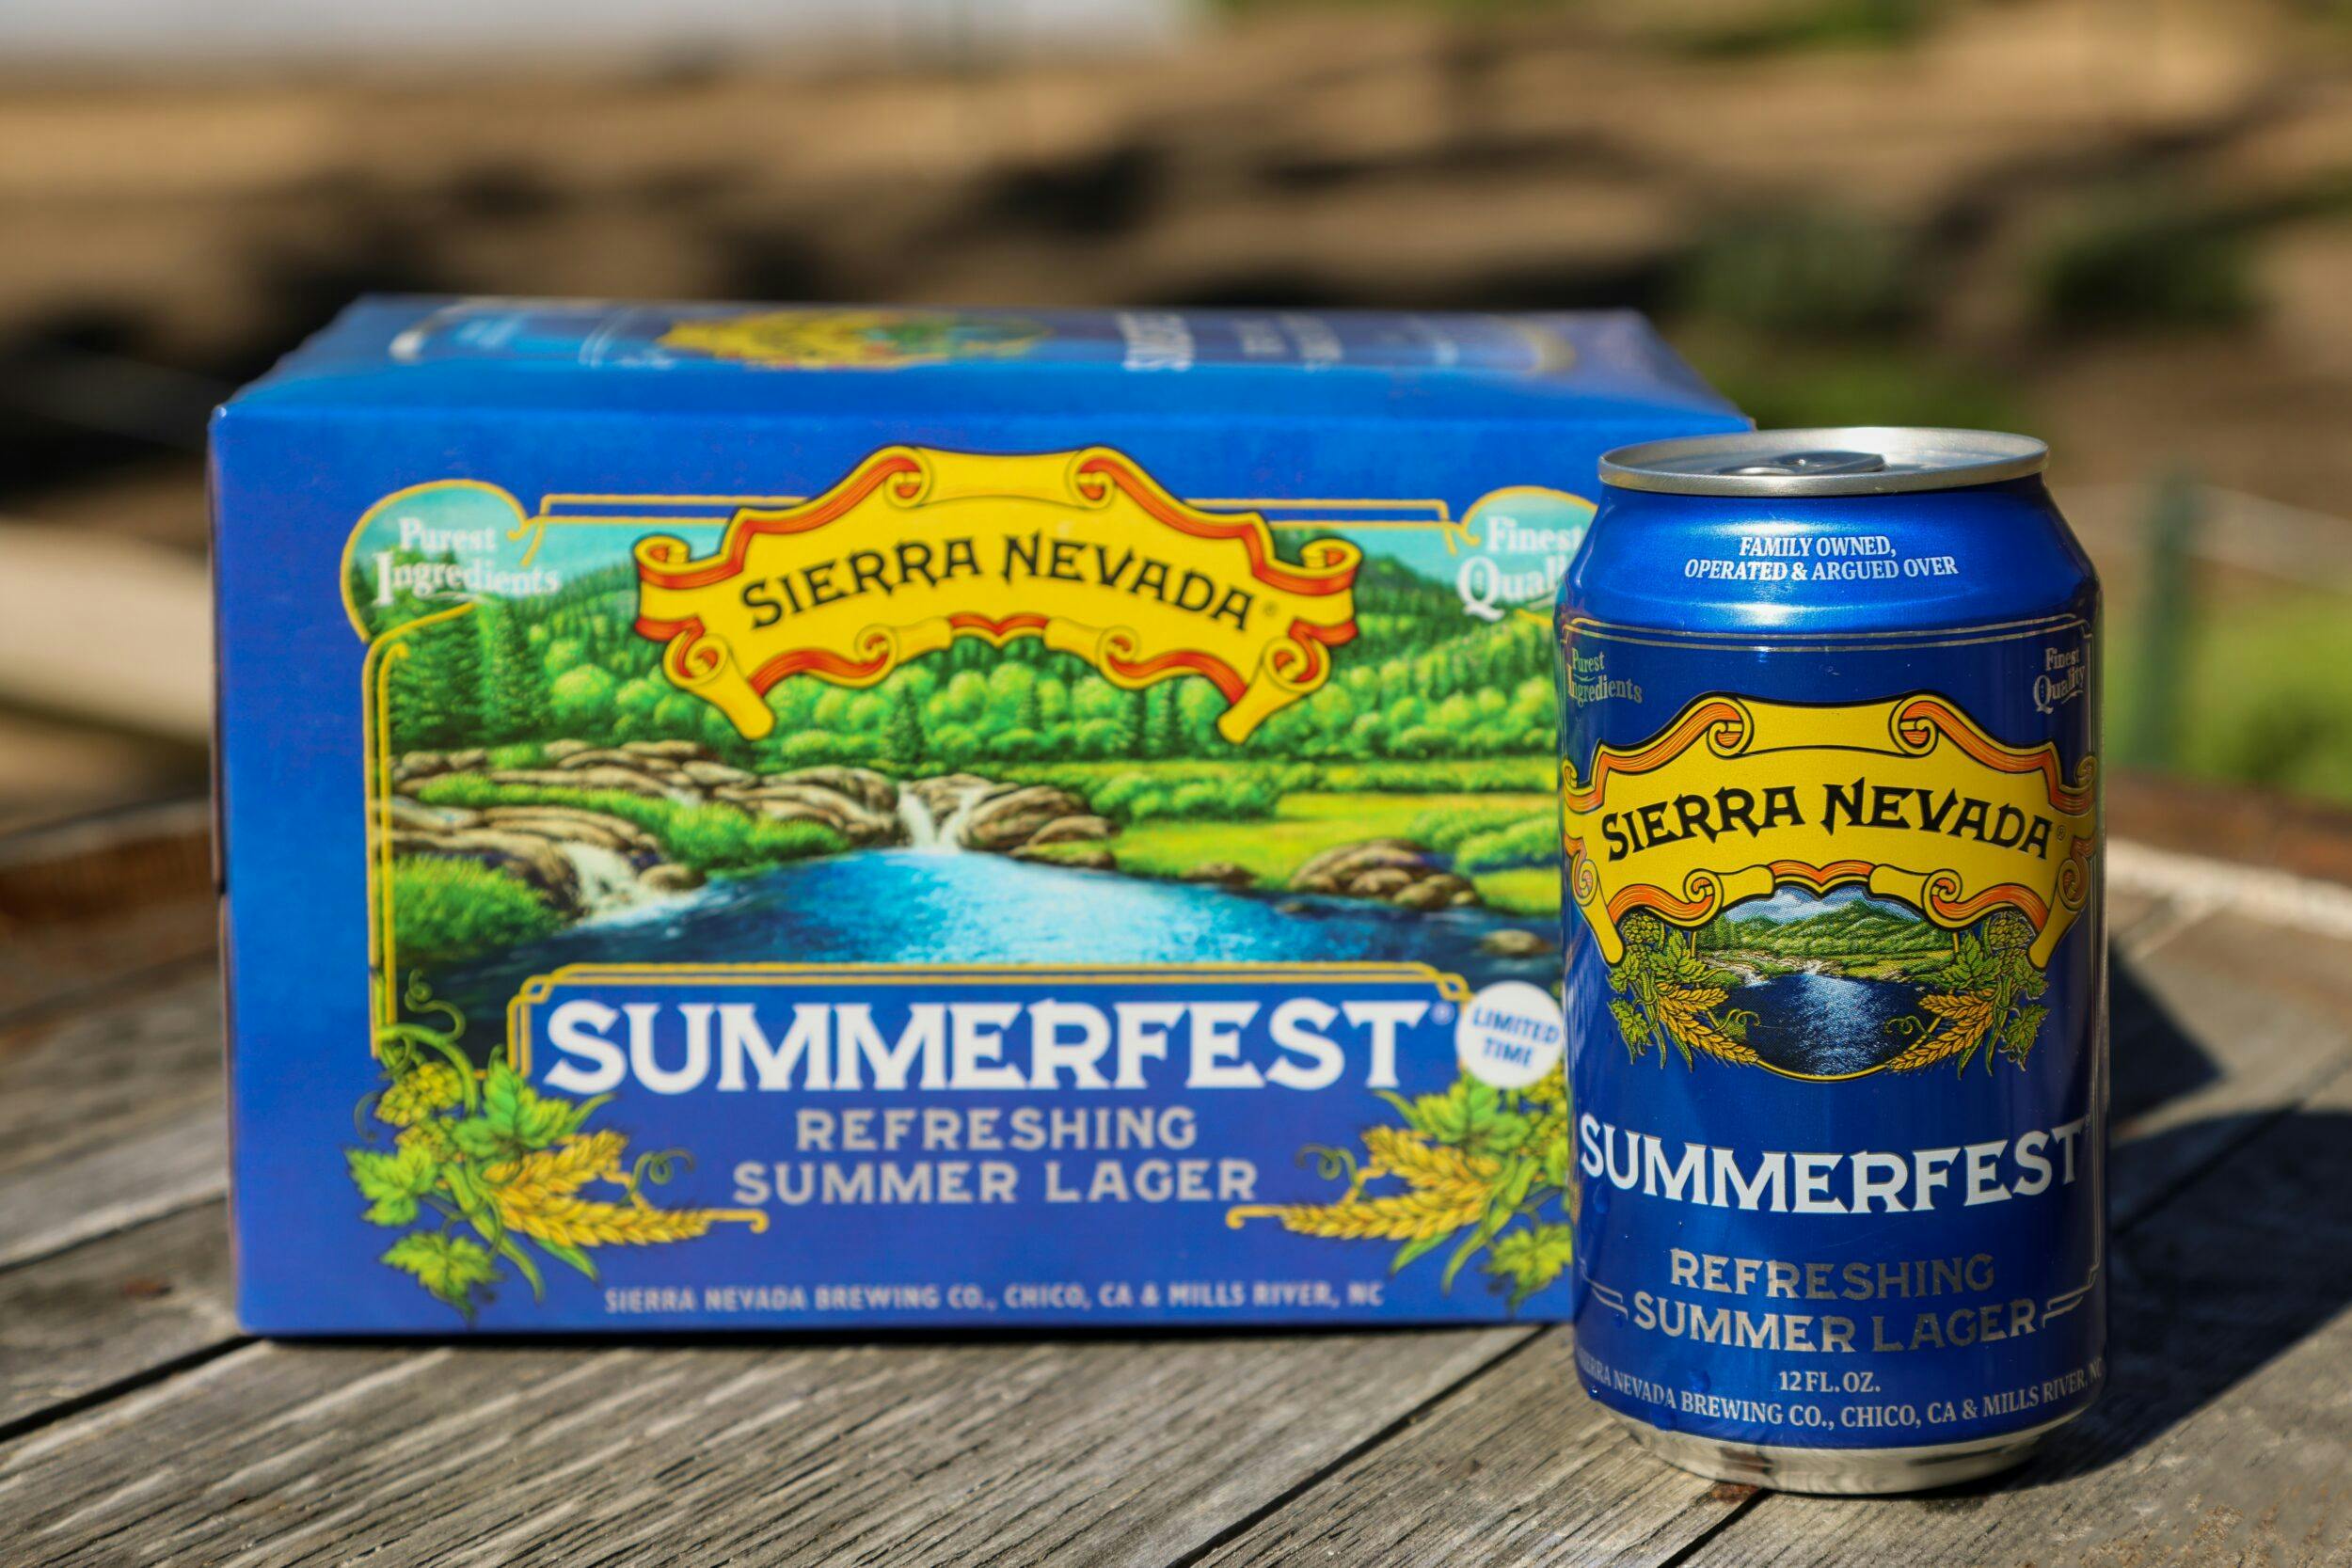 Summerfest beer can and 6-pack on table outside